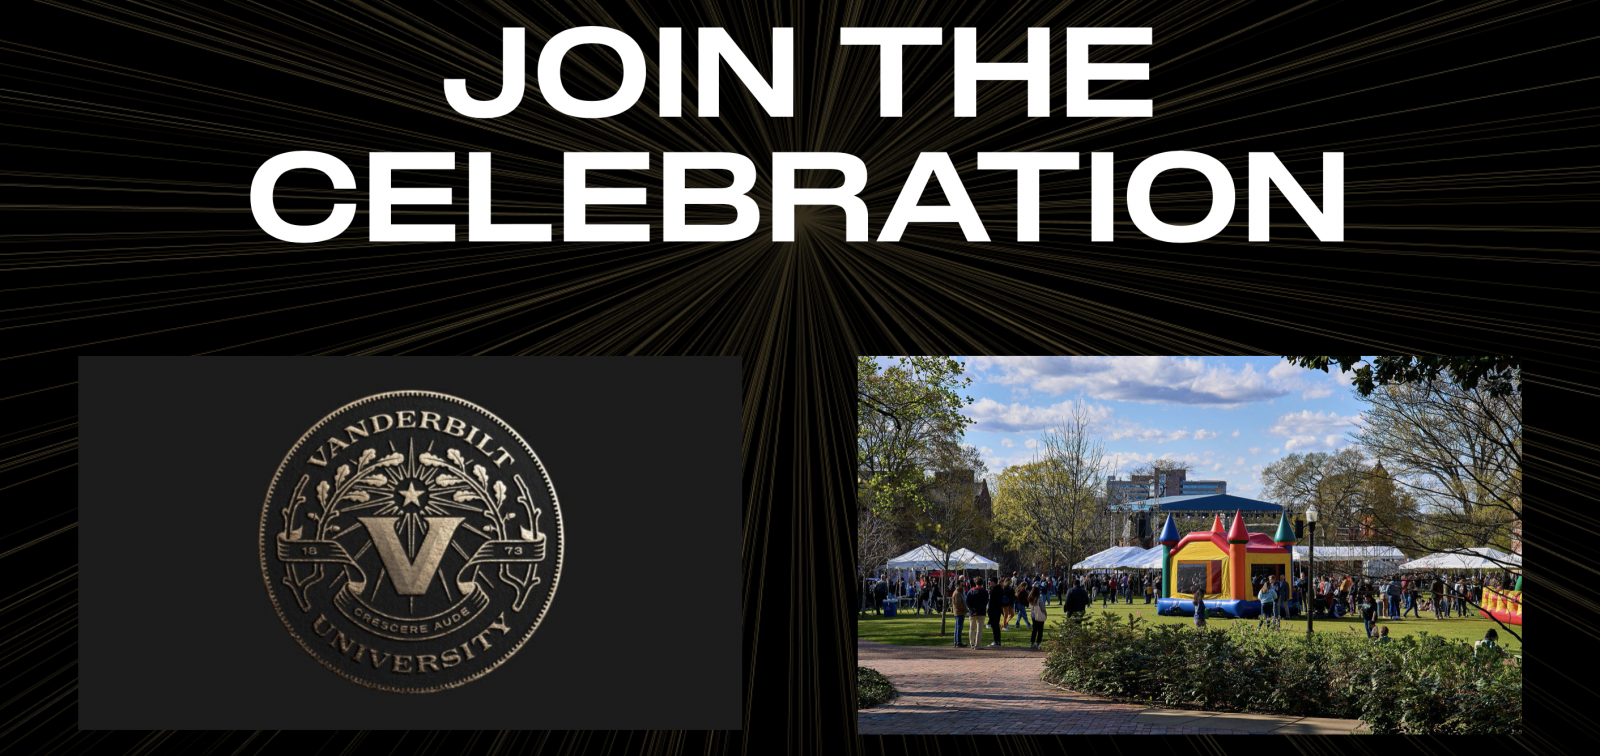 Sesquicentennial events: Join the Celebration